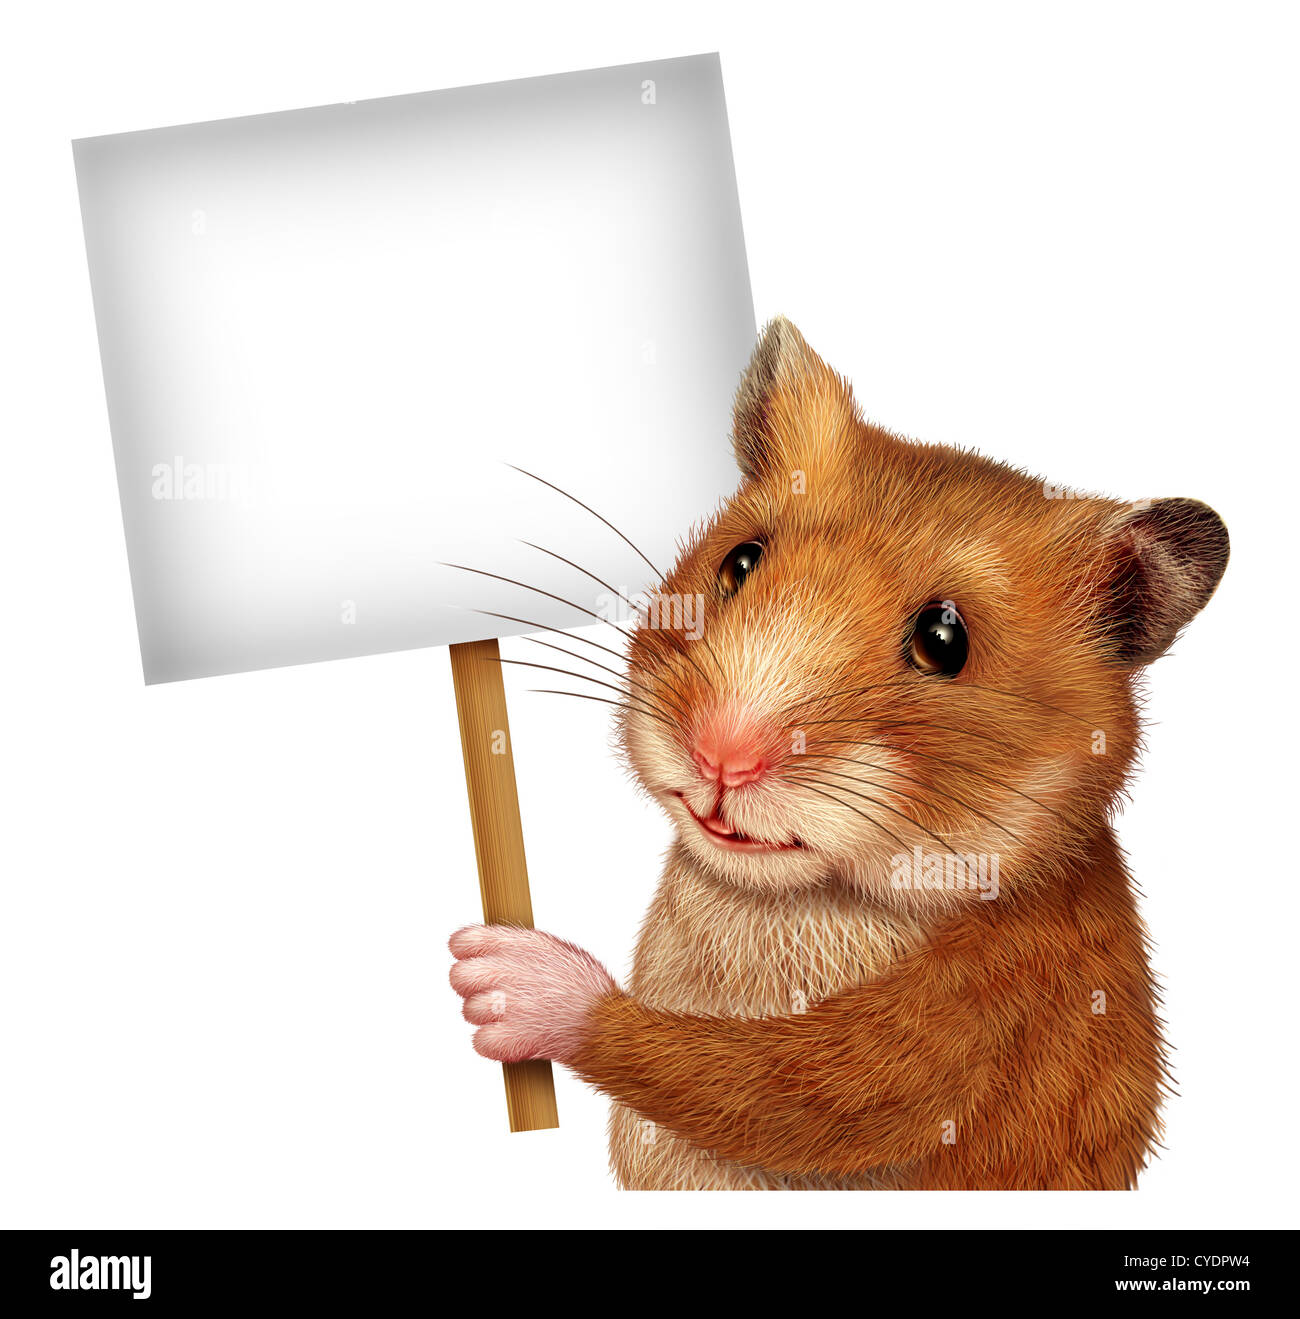 Pet hamster holding a blank white sign on a stick as an advertising and marketing concept with a cute mouse like mammal with a smile communicating an important Veterinary or Veterinarian related message. Stock Photo